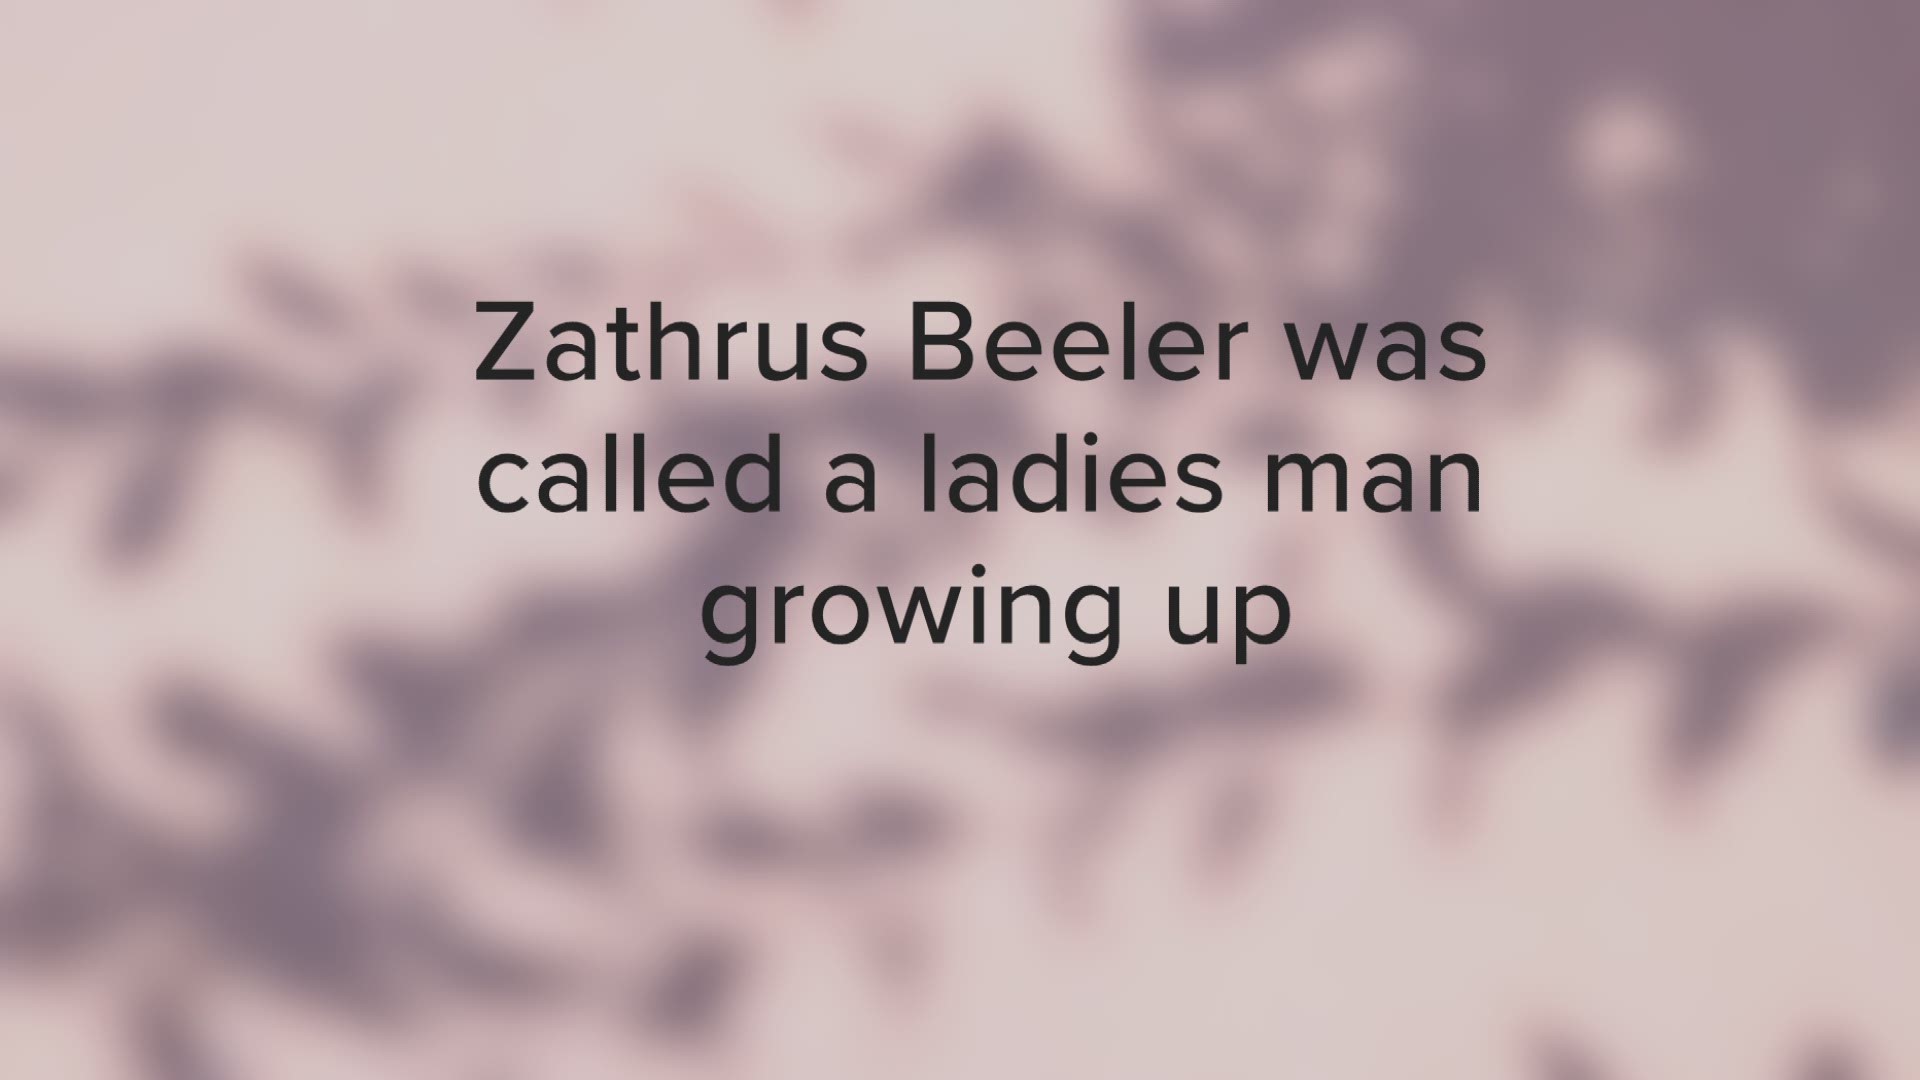 Zathrus Beeler came out as gay in high school but was told it was wrong. He wants you to know it is OK to be who you are and accept yourself.